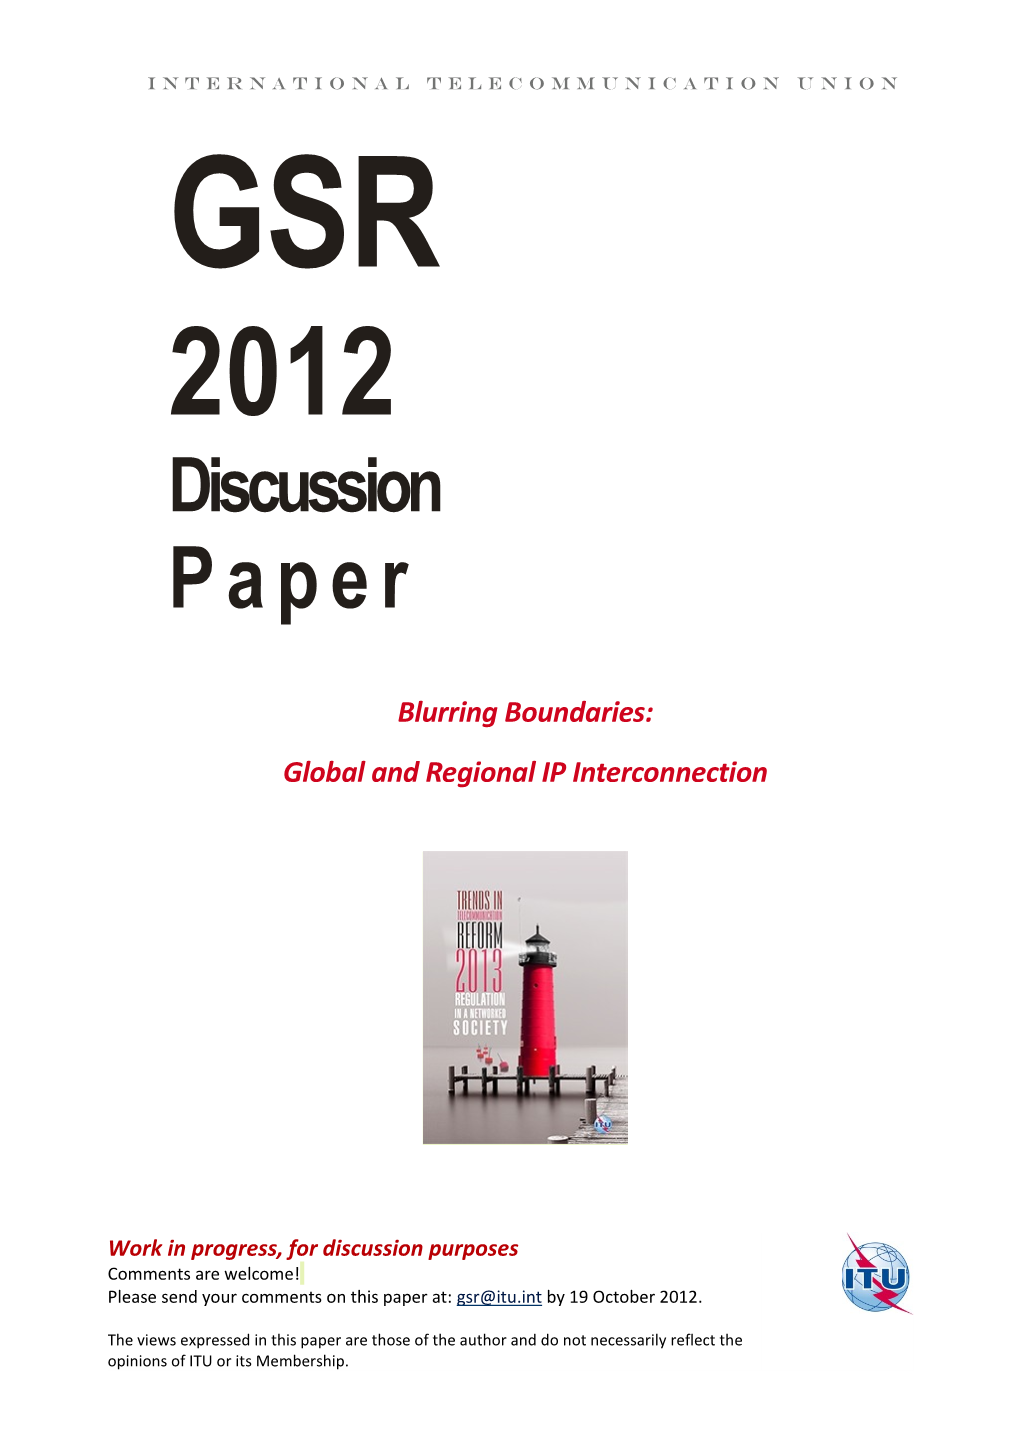 GSR Discussion Paper on Global and Regional IP Interconnection